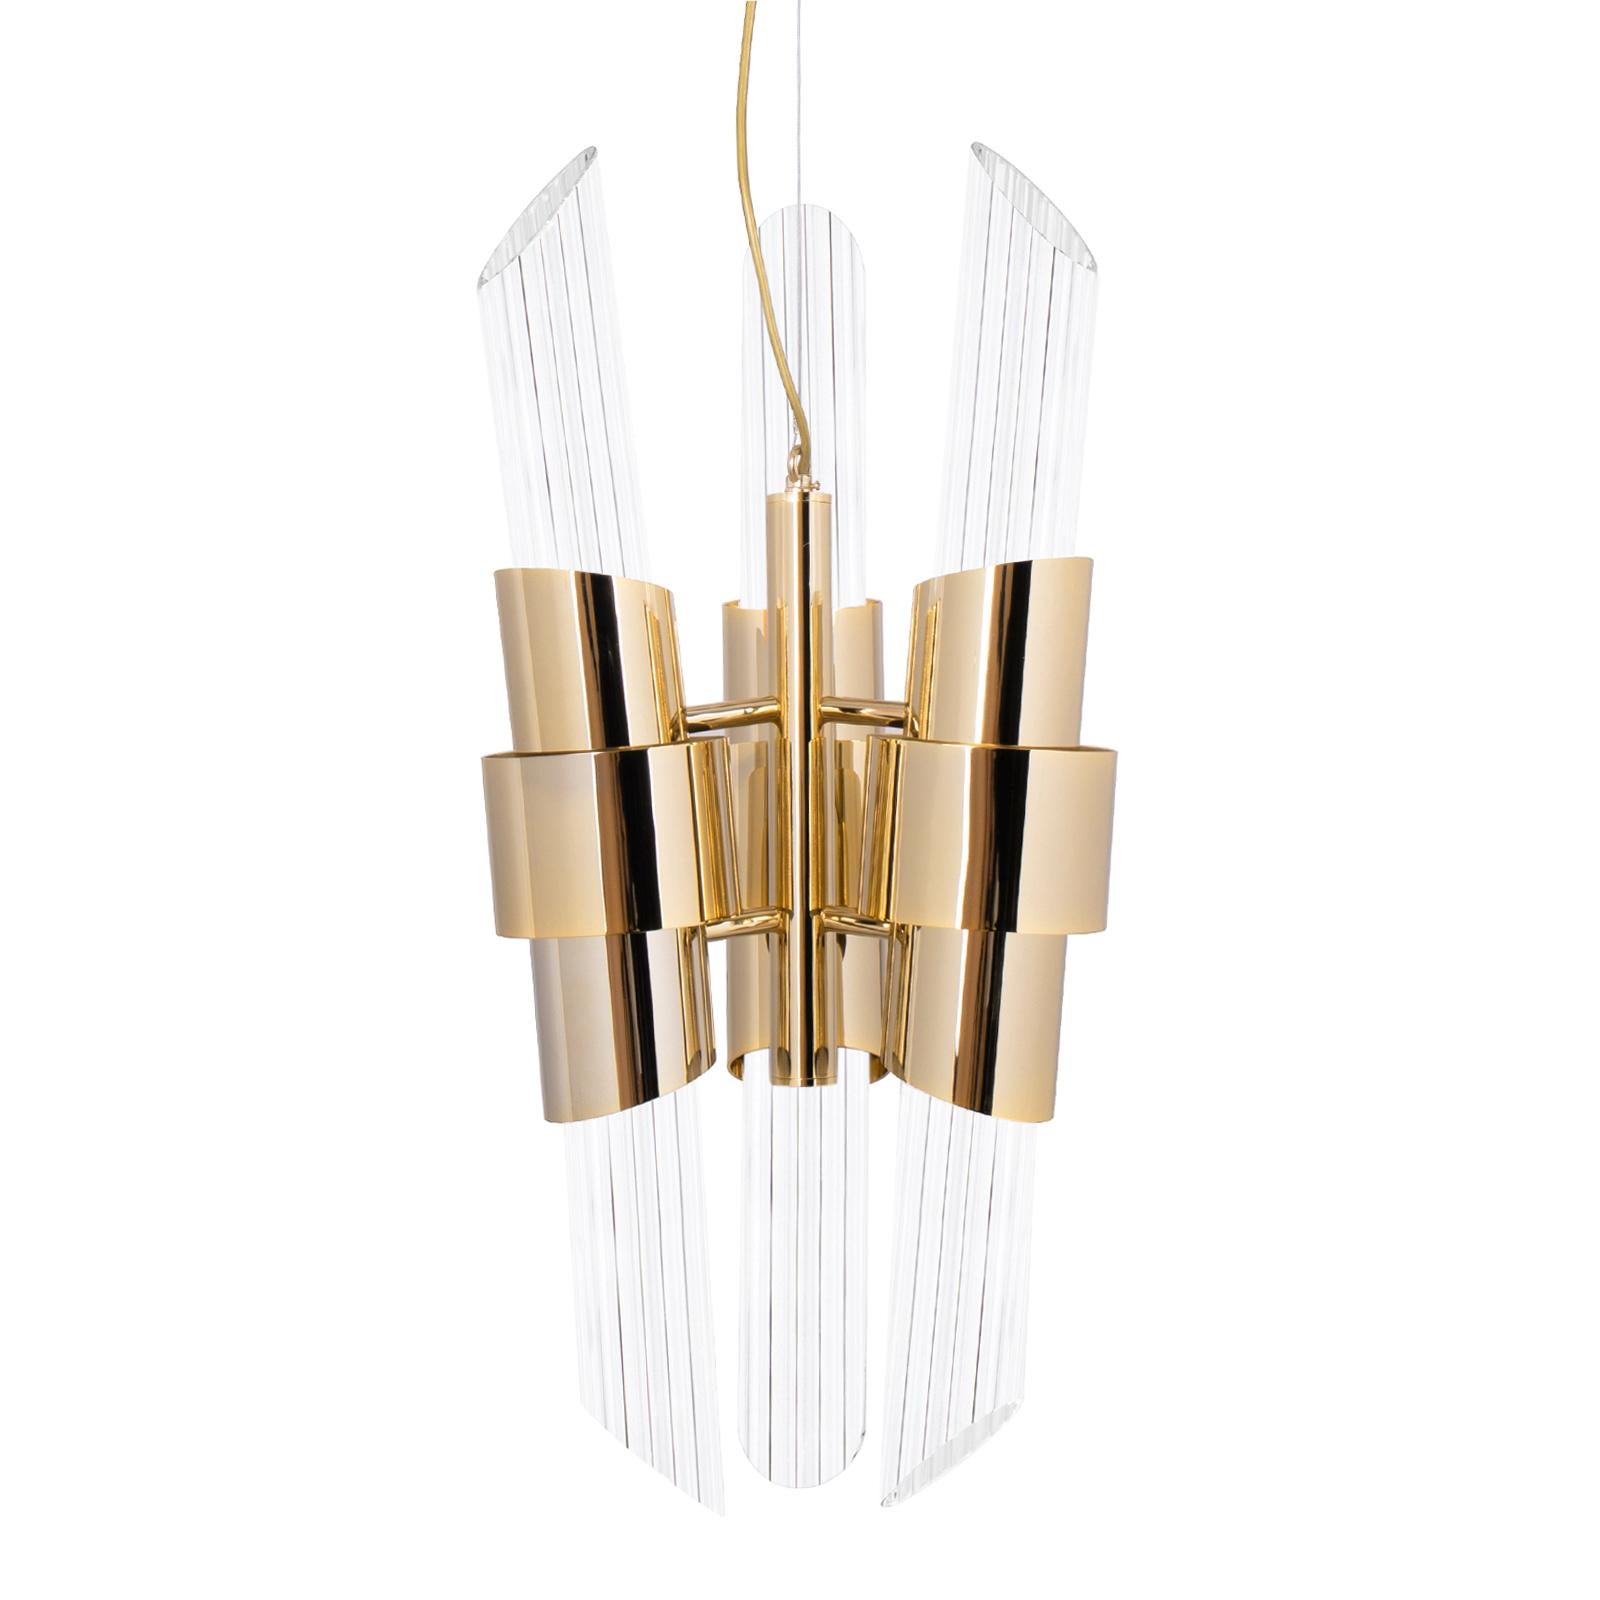 Medium pendant Vitta gold with ribbed crystal glass cylinders
gathered and held by a gold plated polished brass structure.
With 6 Bulbs, lamp holder type Led G9 -2 Watt max. For 220-240V.
Bulbs not included. With adjustable cord height: 200 cm.